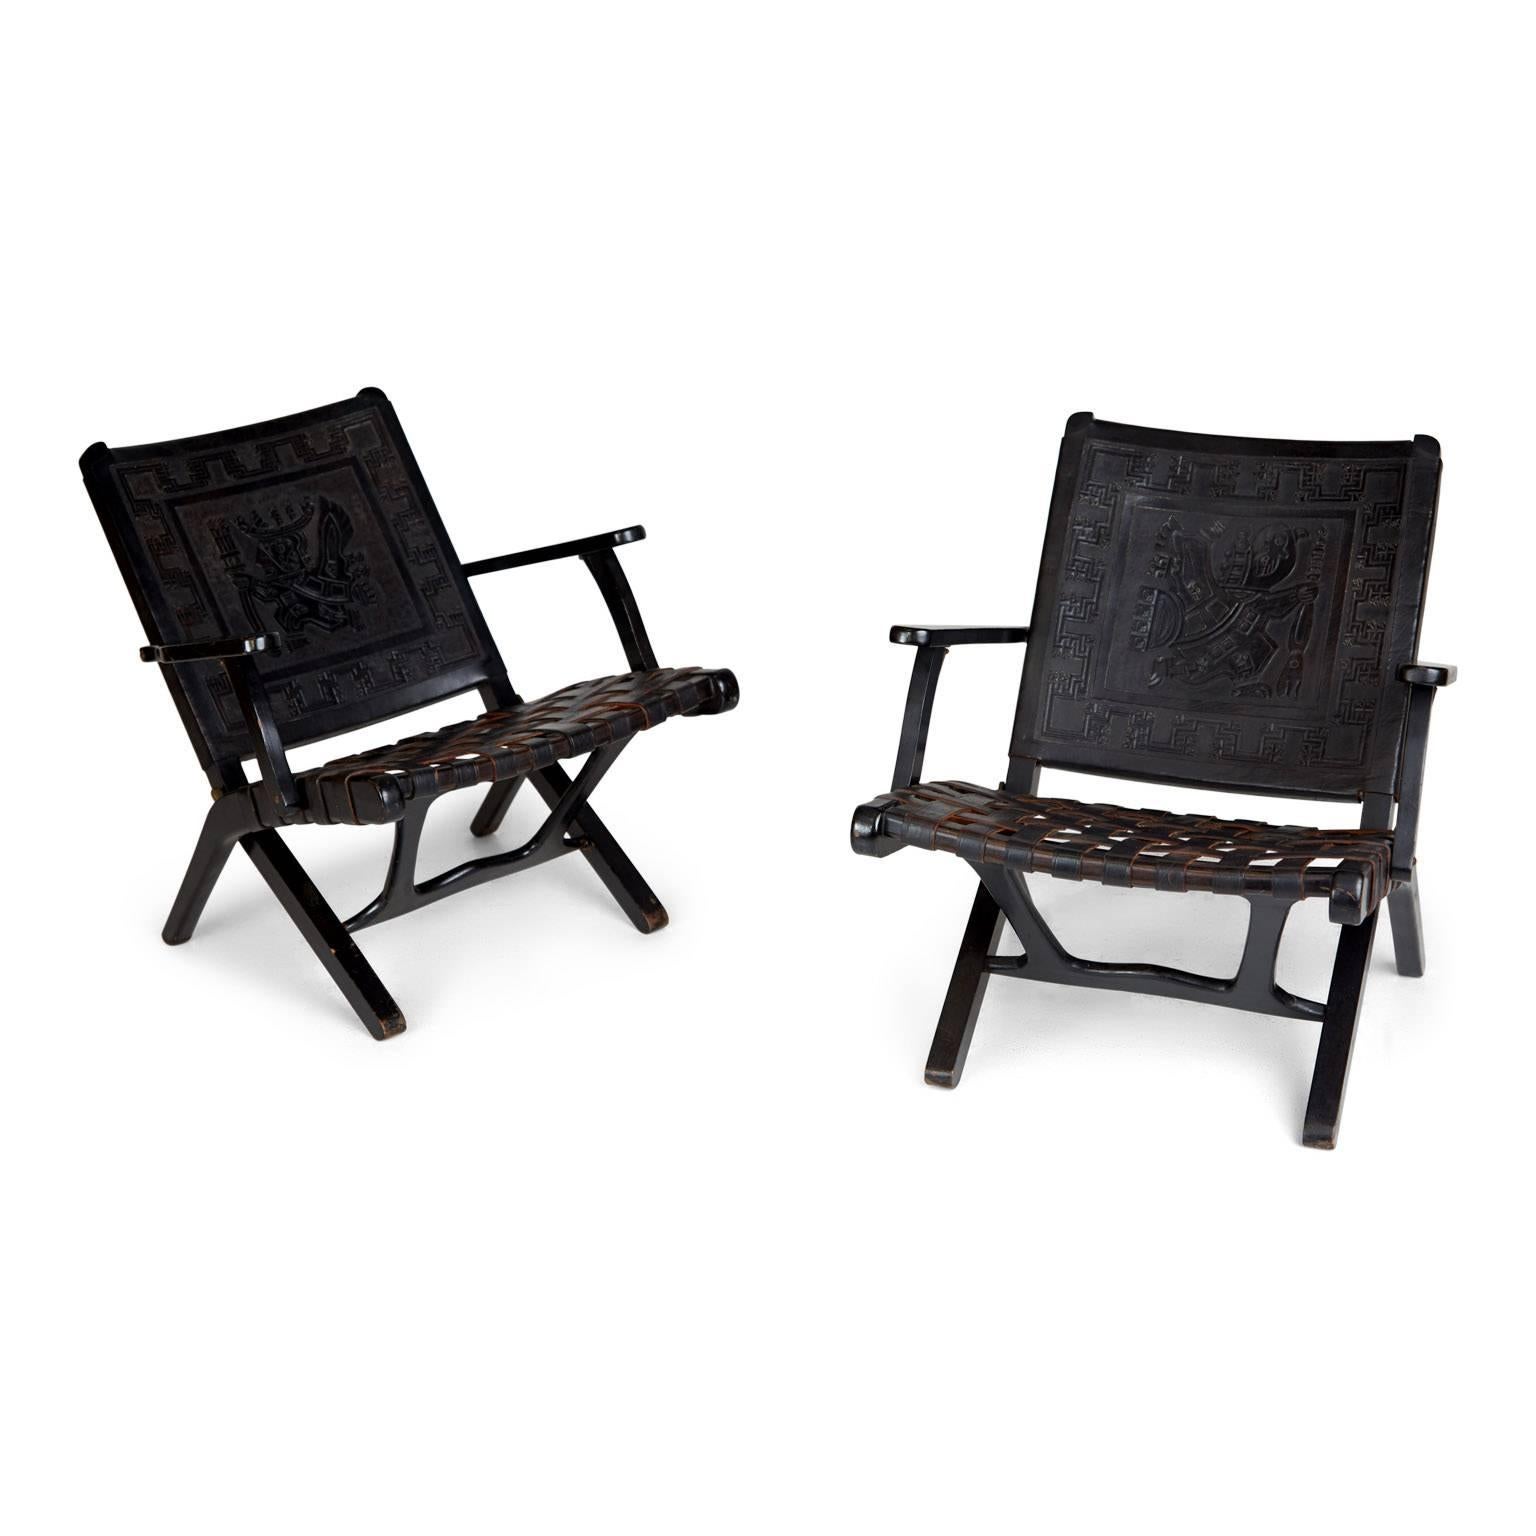 Pair of two exquisitely crafted black leather Peruvian folding chairs. Each chair features a tooled leather backrest with a different motif in the centre, surrounded by an ornate border and the seats are fabricated from woven strips of leather.
The